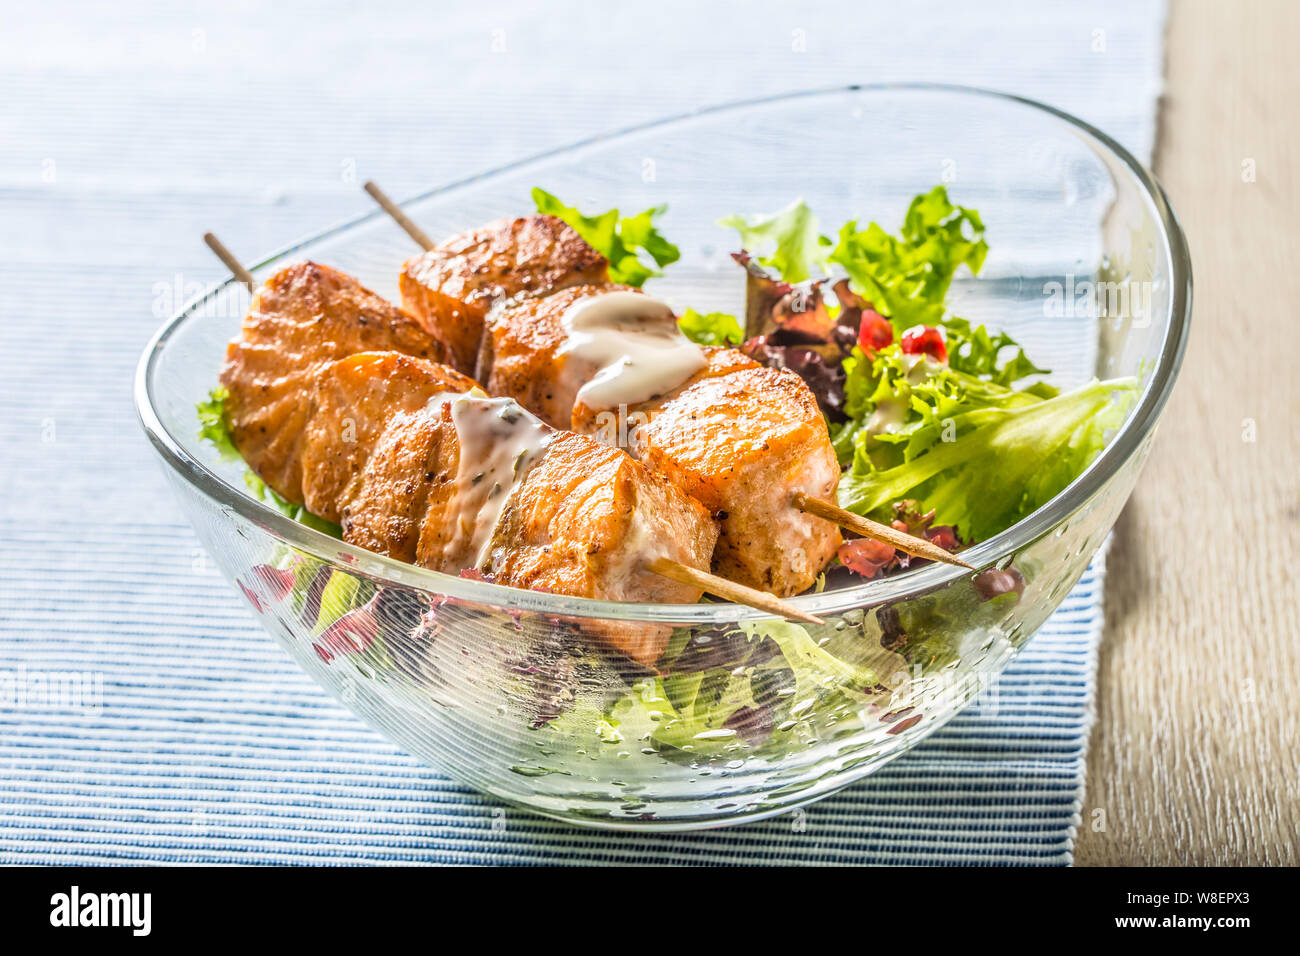 Grilled salmon skewers with summer lettuce salat pomehranate seeds olive oil and dressing. Healthy fish food with fruit and vegetable Stock Photo